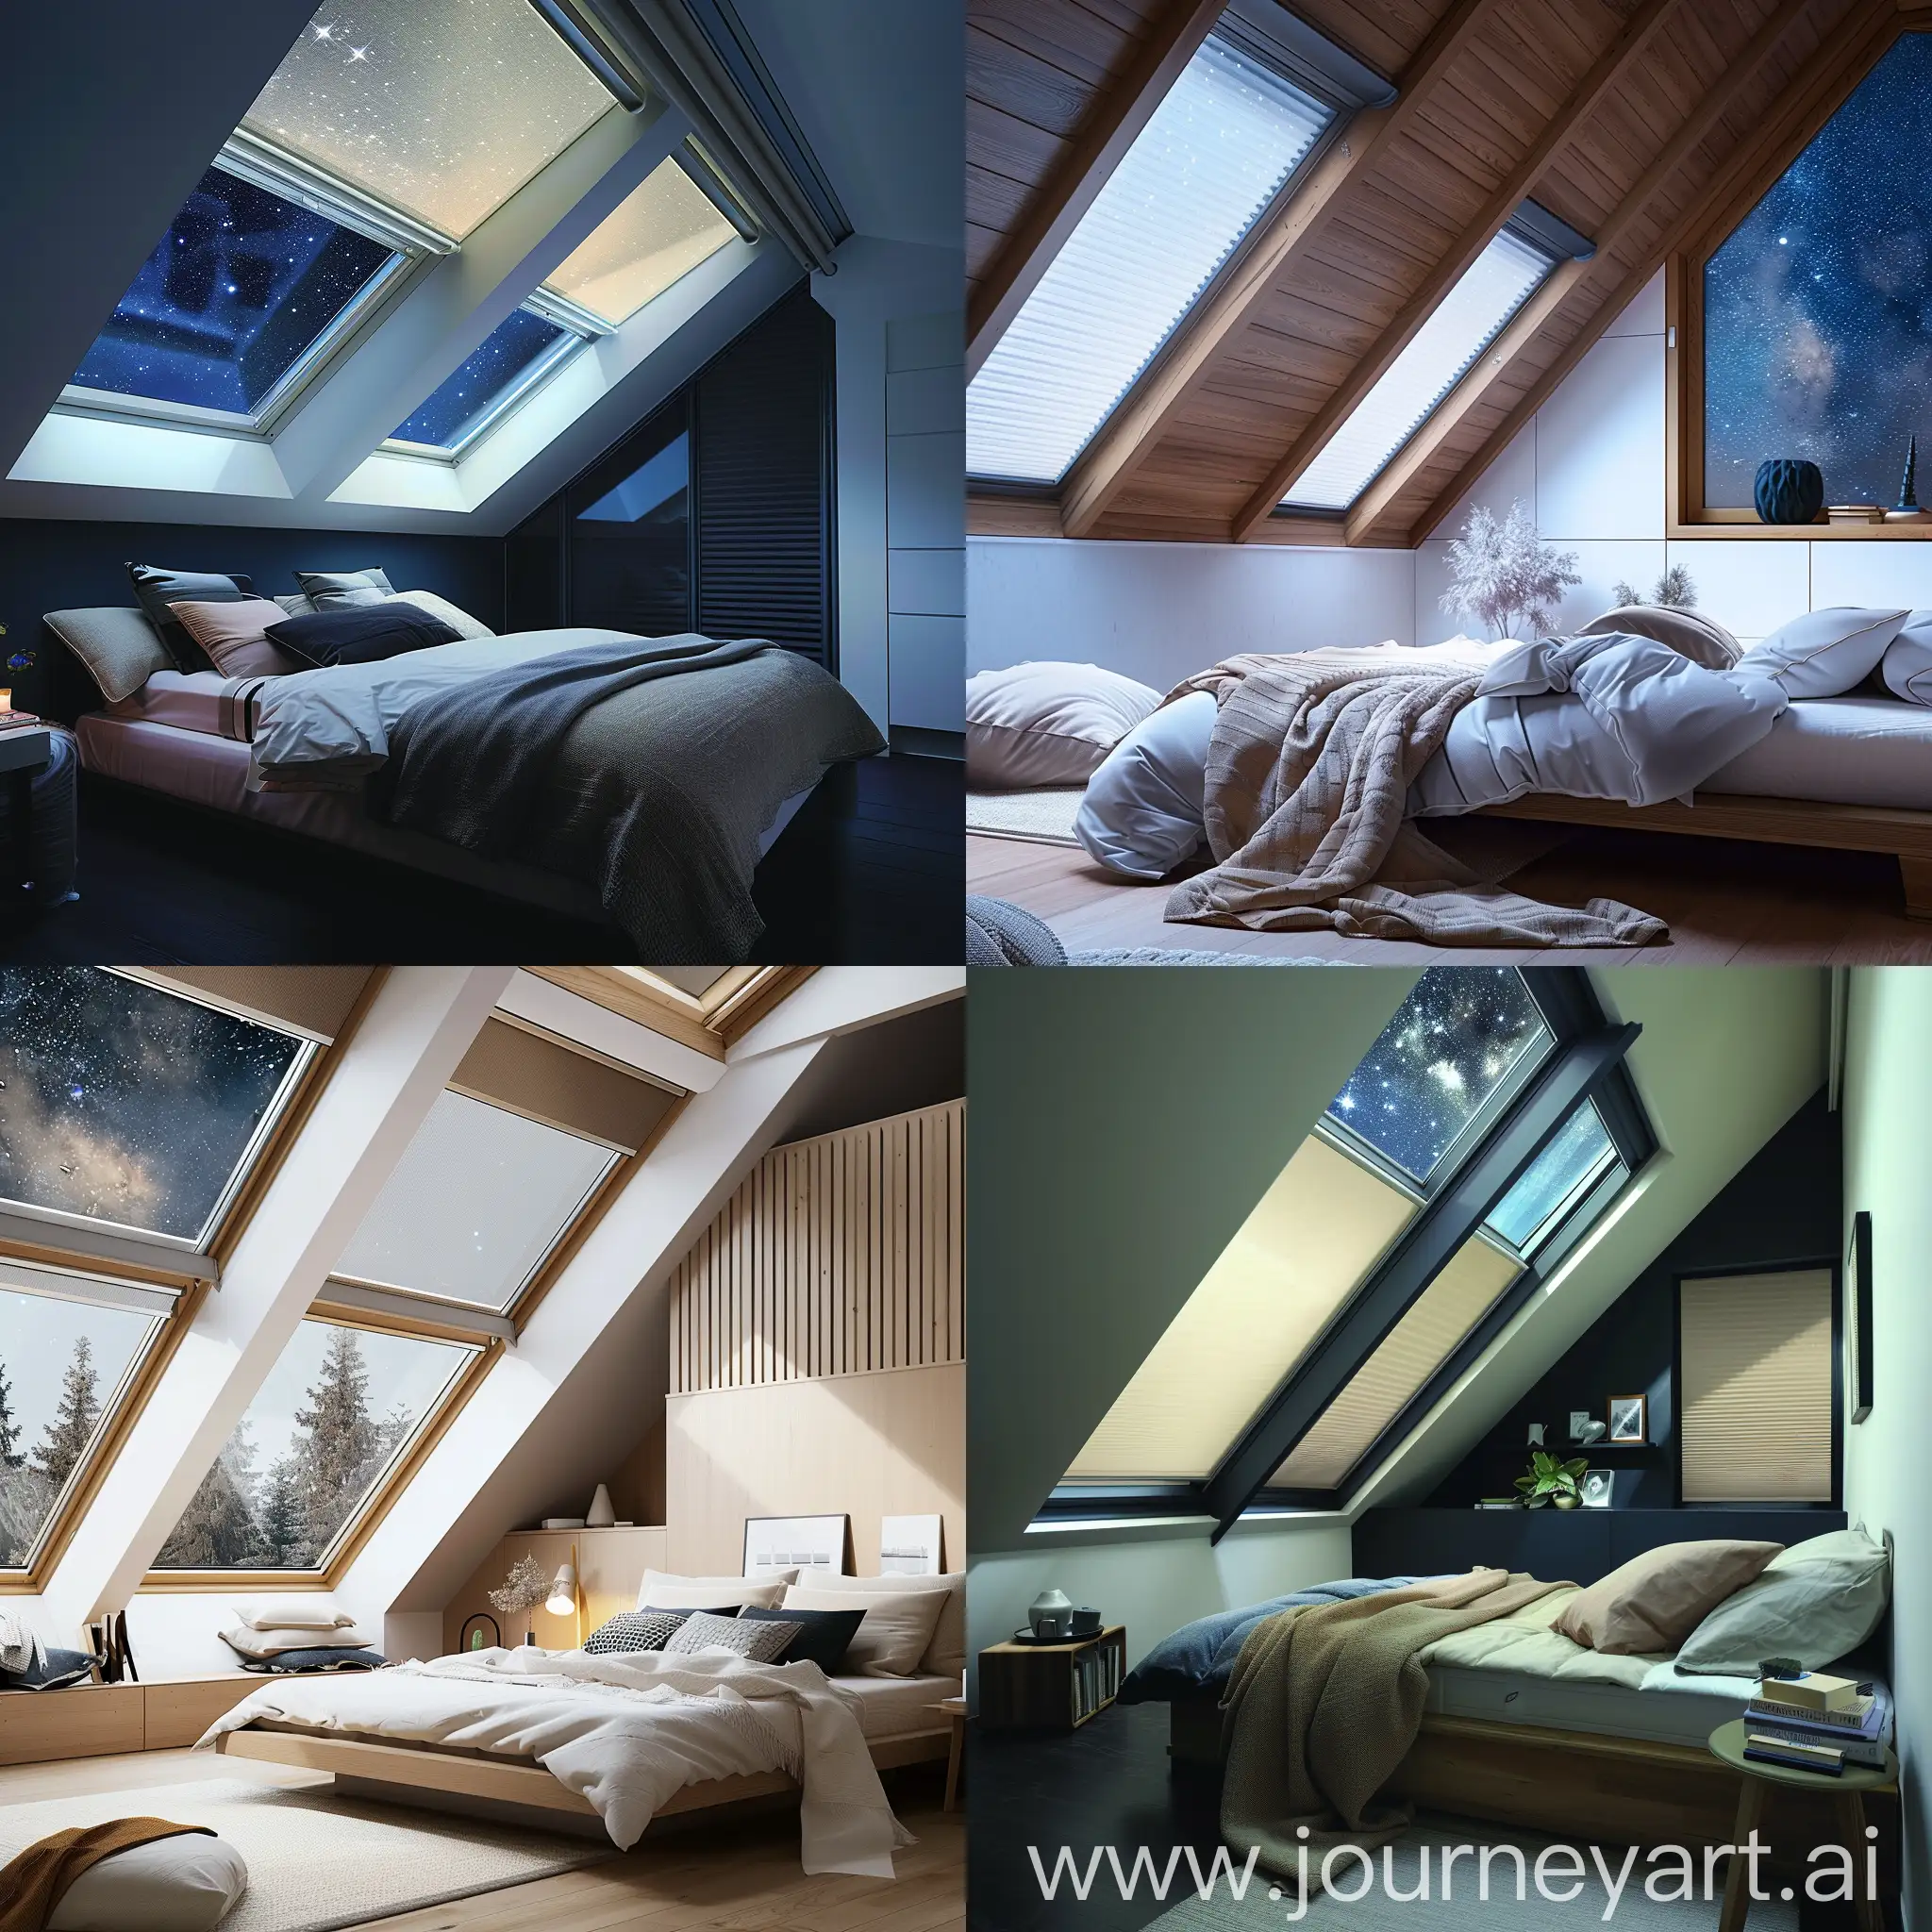 Imagine a modern attic apartment where you can enjoy the starry sky from your bed. Thanks to the energy-saving glazed skylights in the apartment, the space is always pleasantly warm in winter and cool in summer. Now imagine how the room has shades that are not only practical, but also stylish.